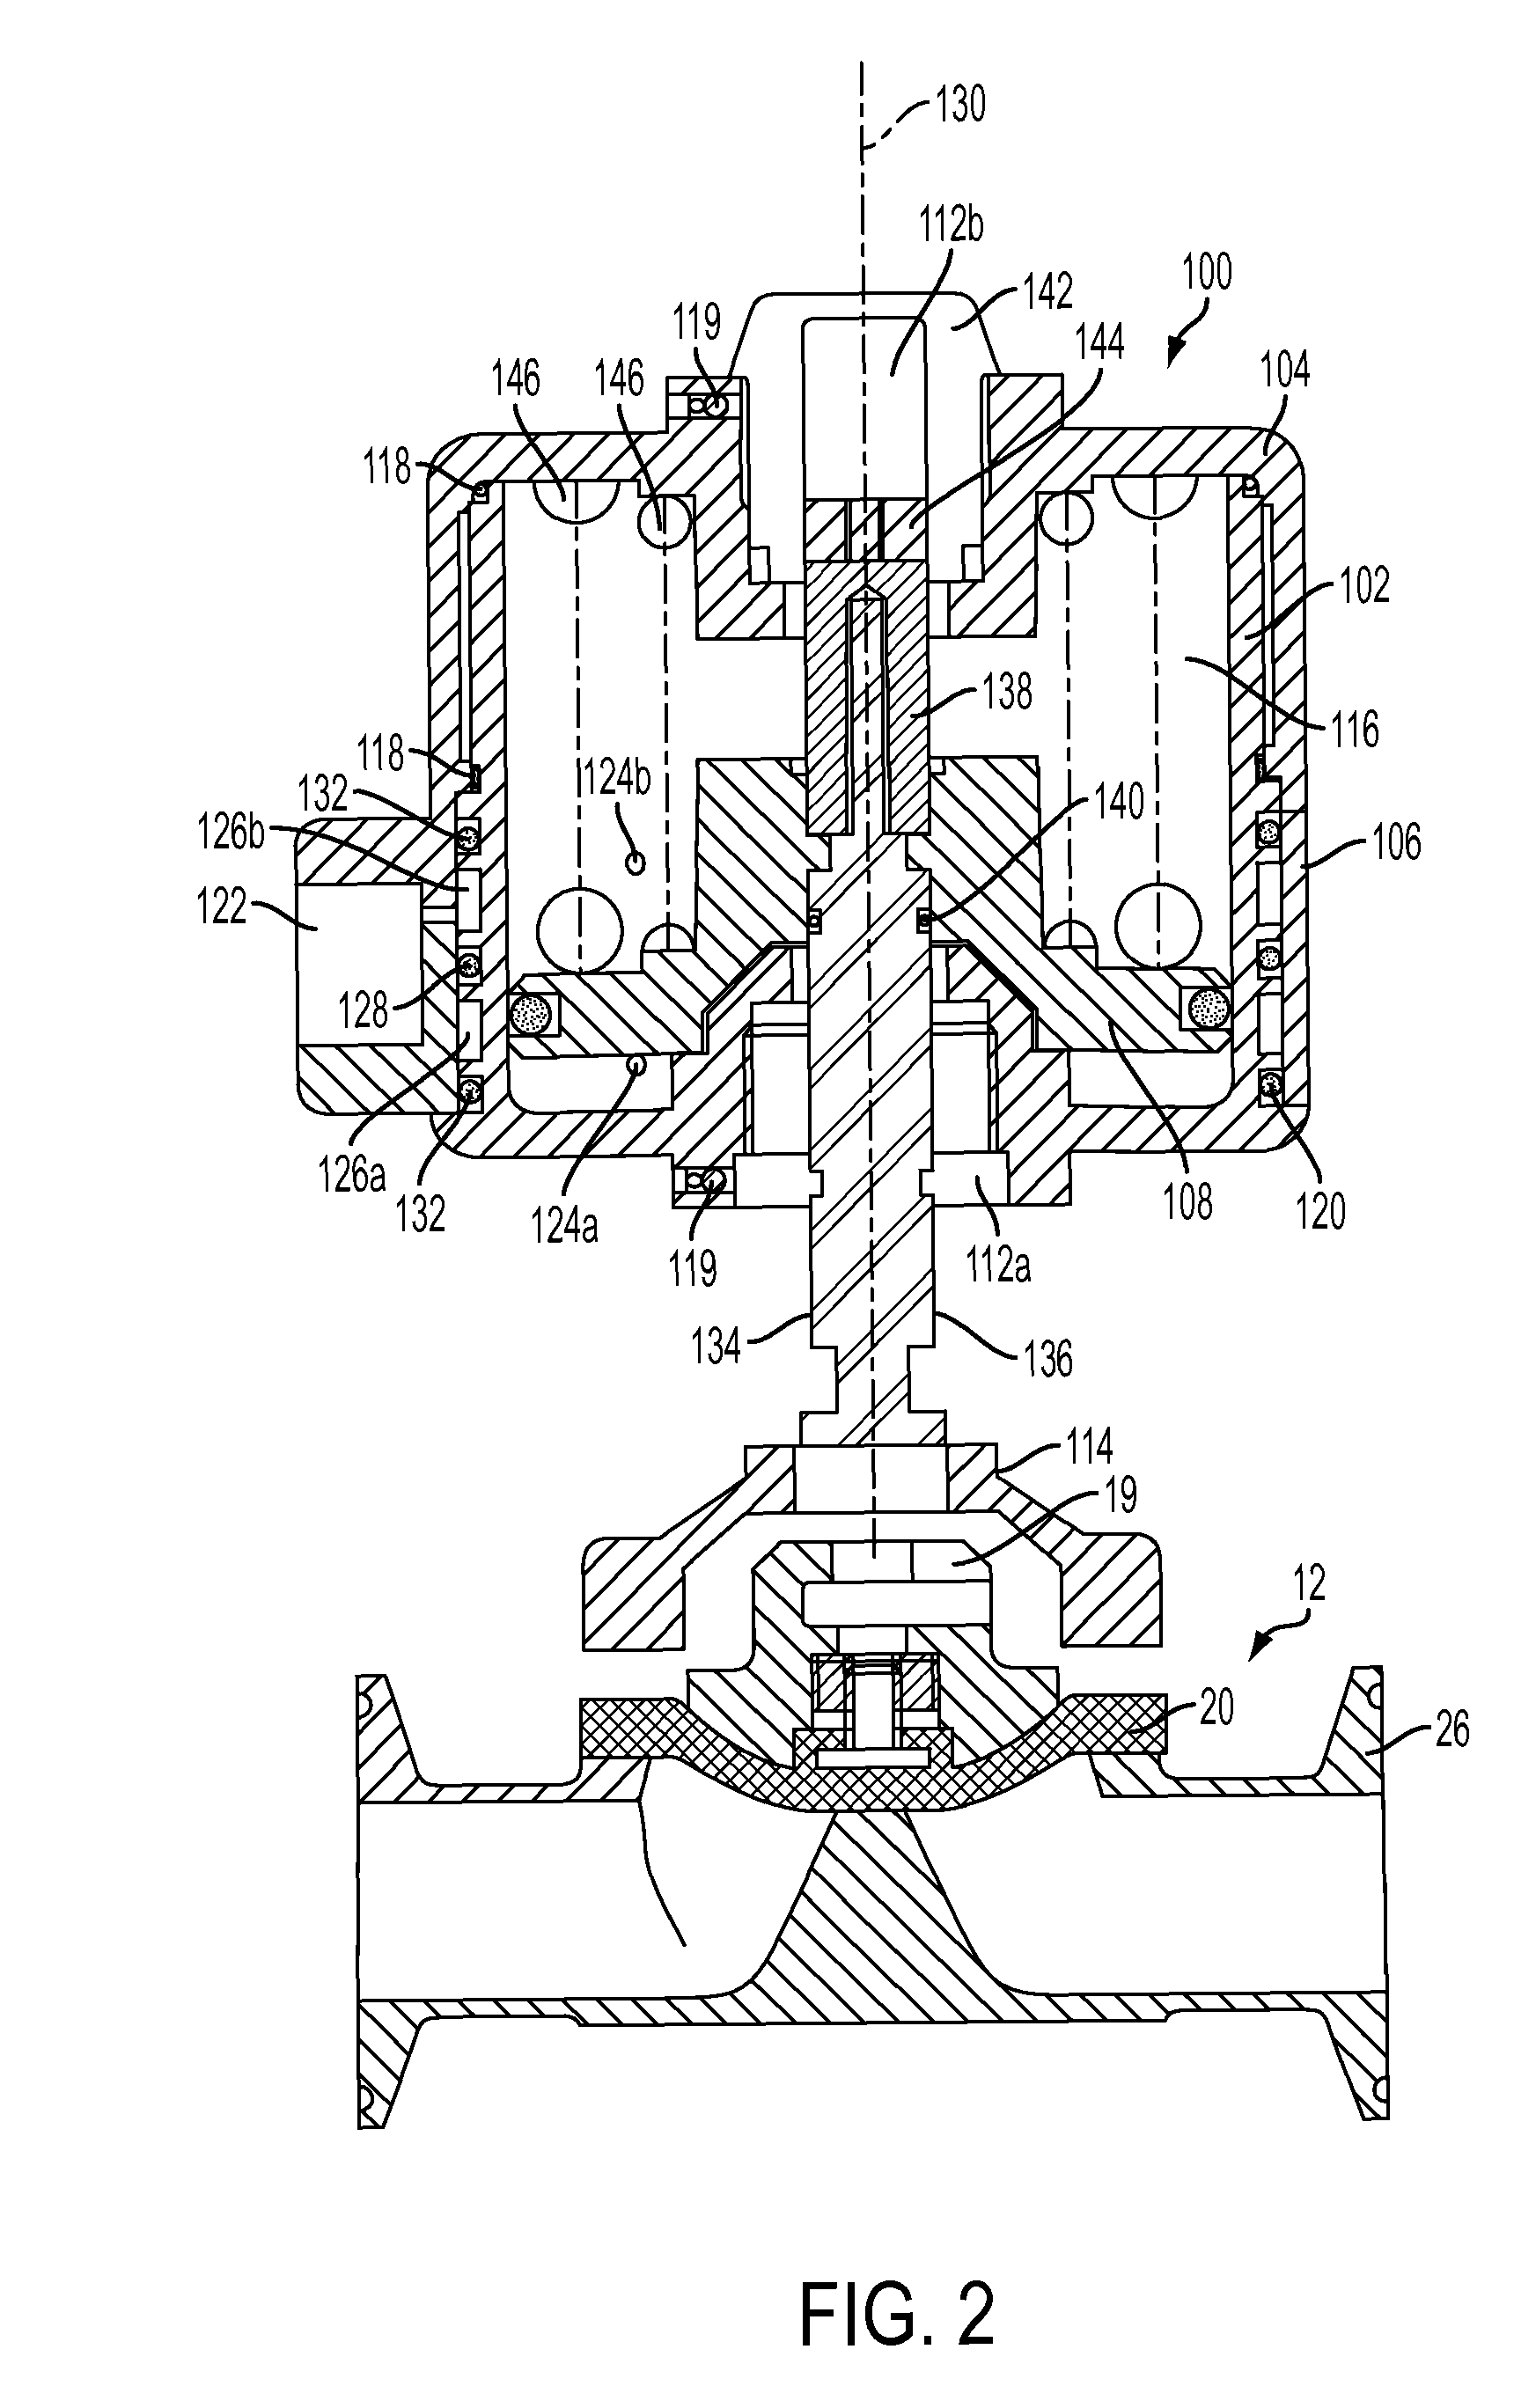 Actuator for operating valves such as diaphragm valves